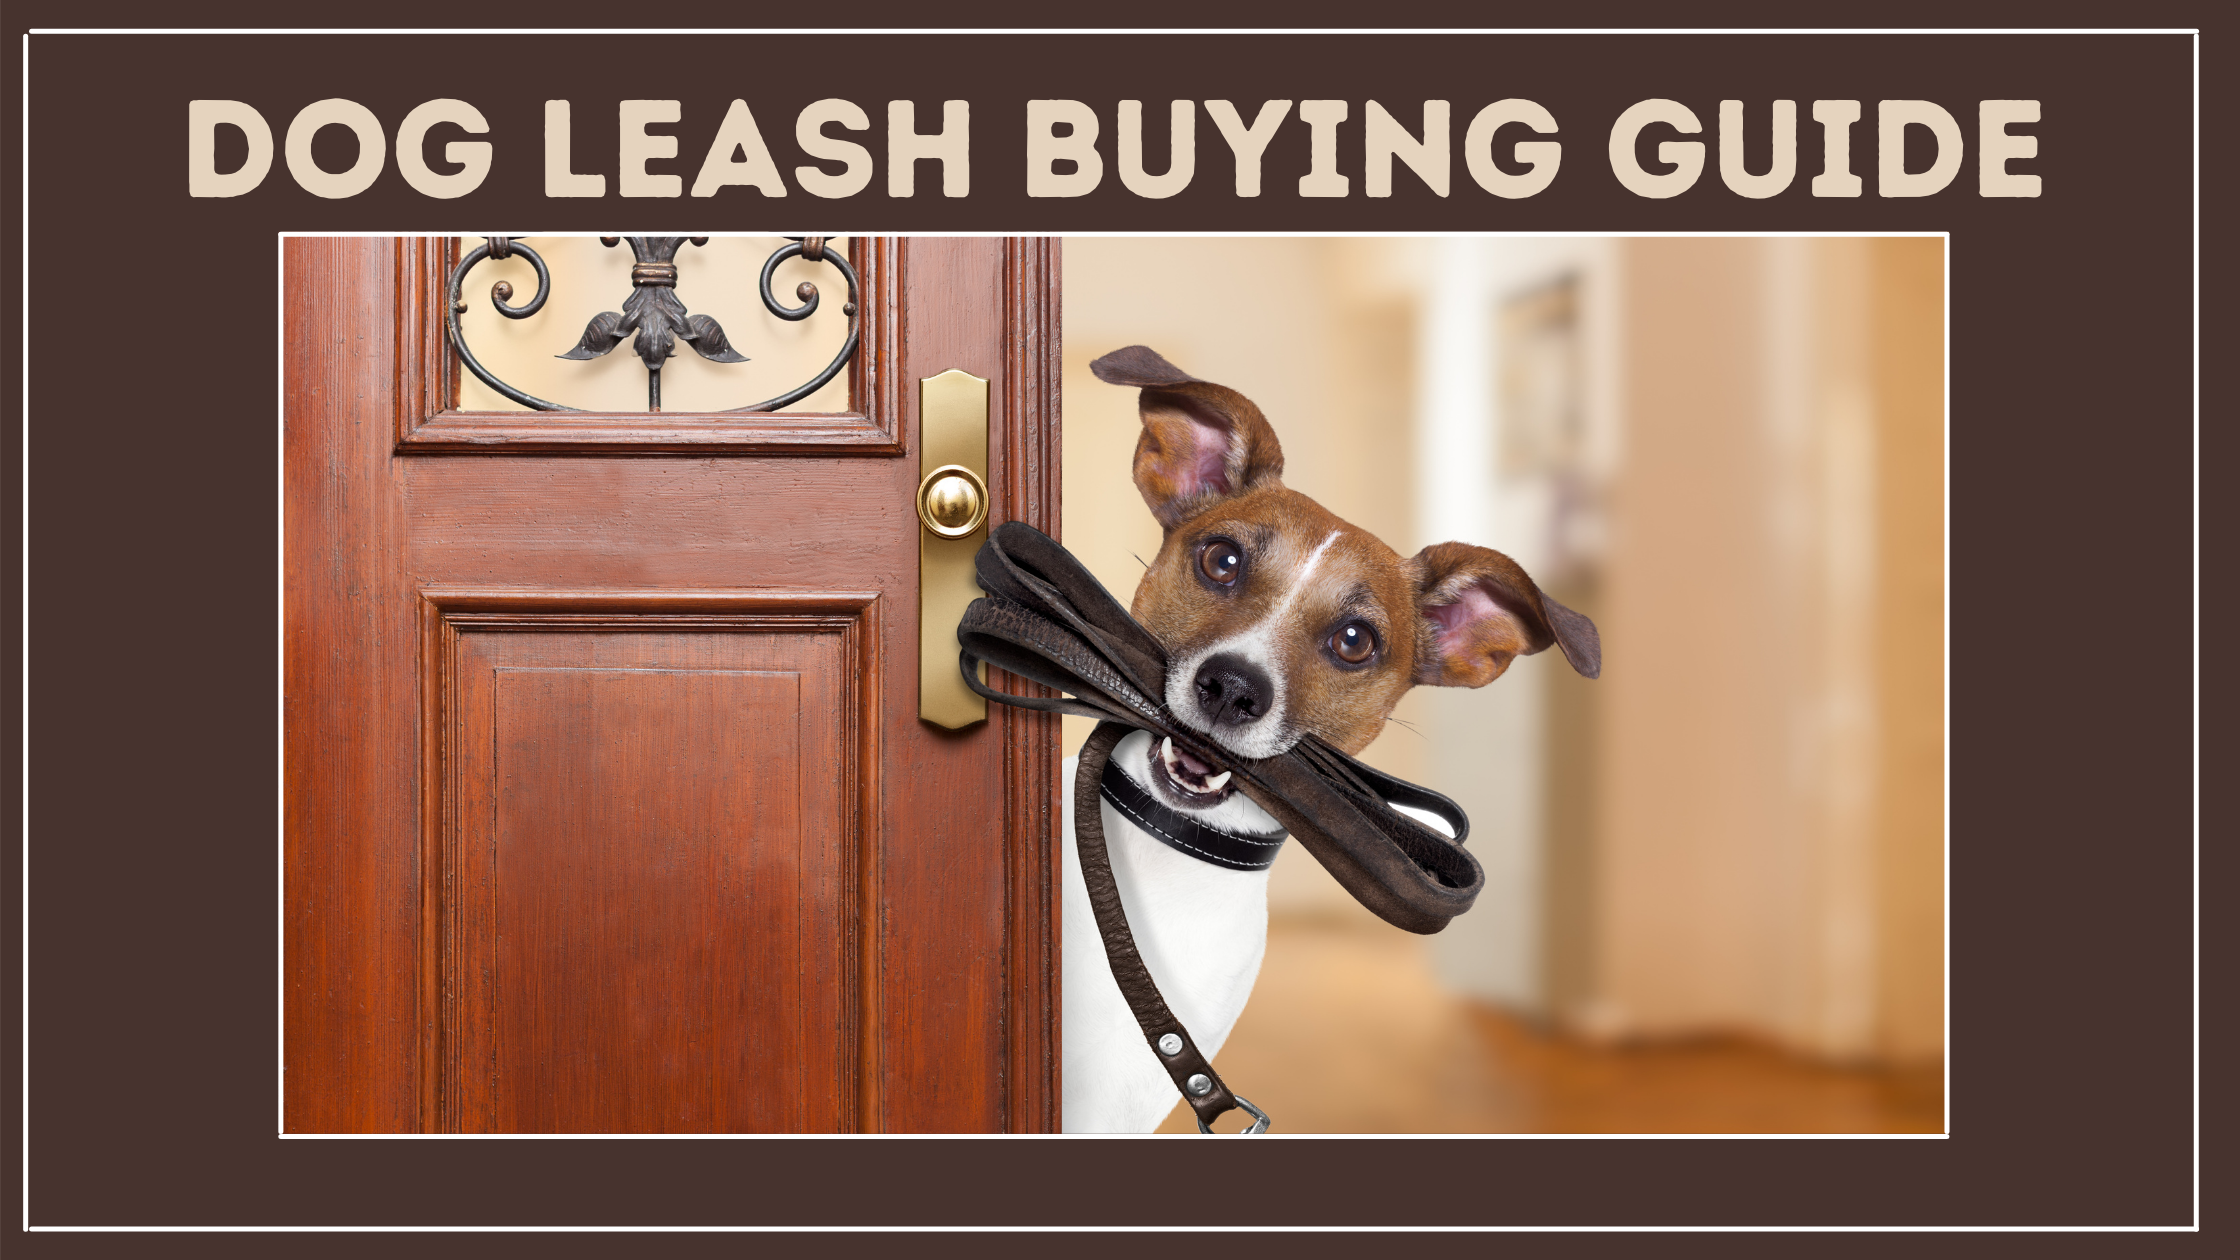 Dog Leash Buying Guide